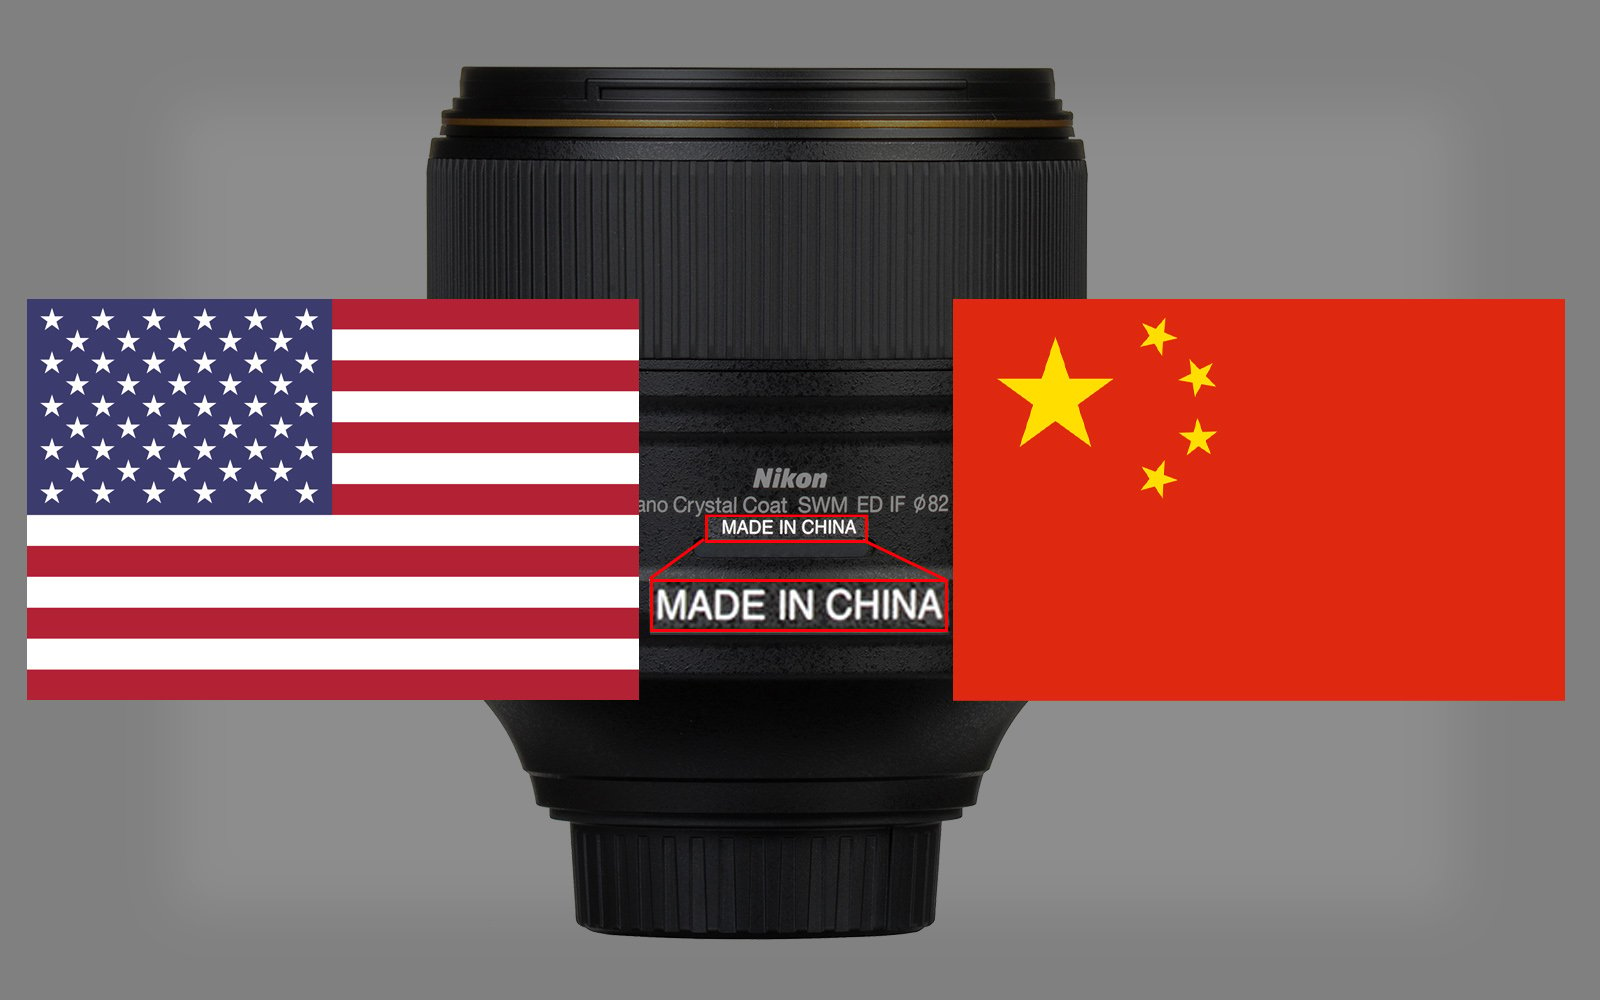 Trump Announces New Tariffs that May Affect the Price of Cameras and Lenses